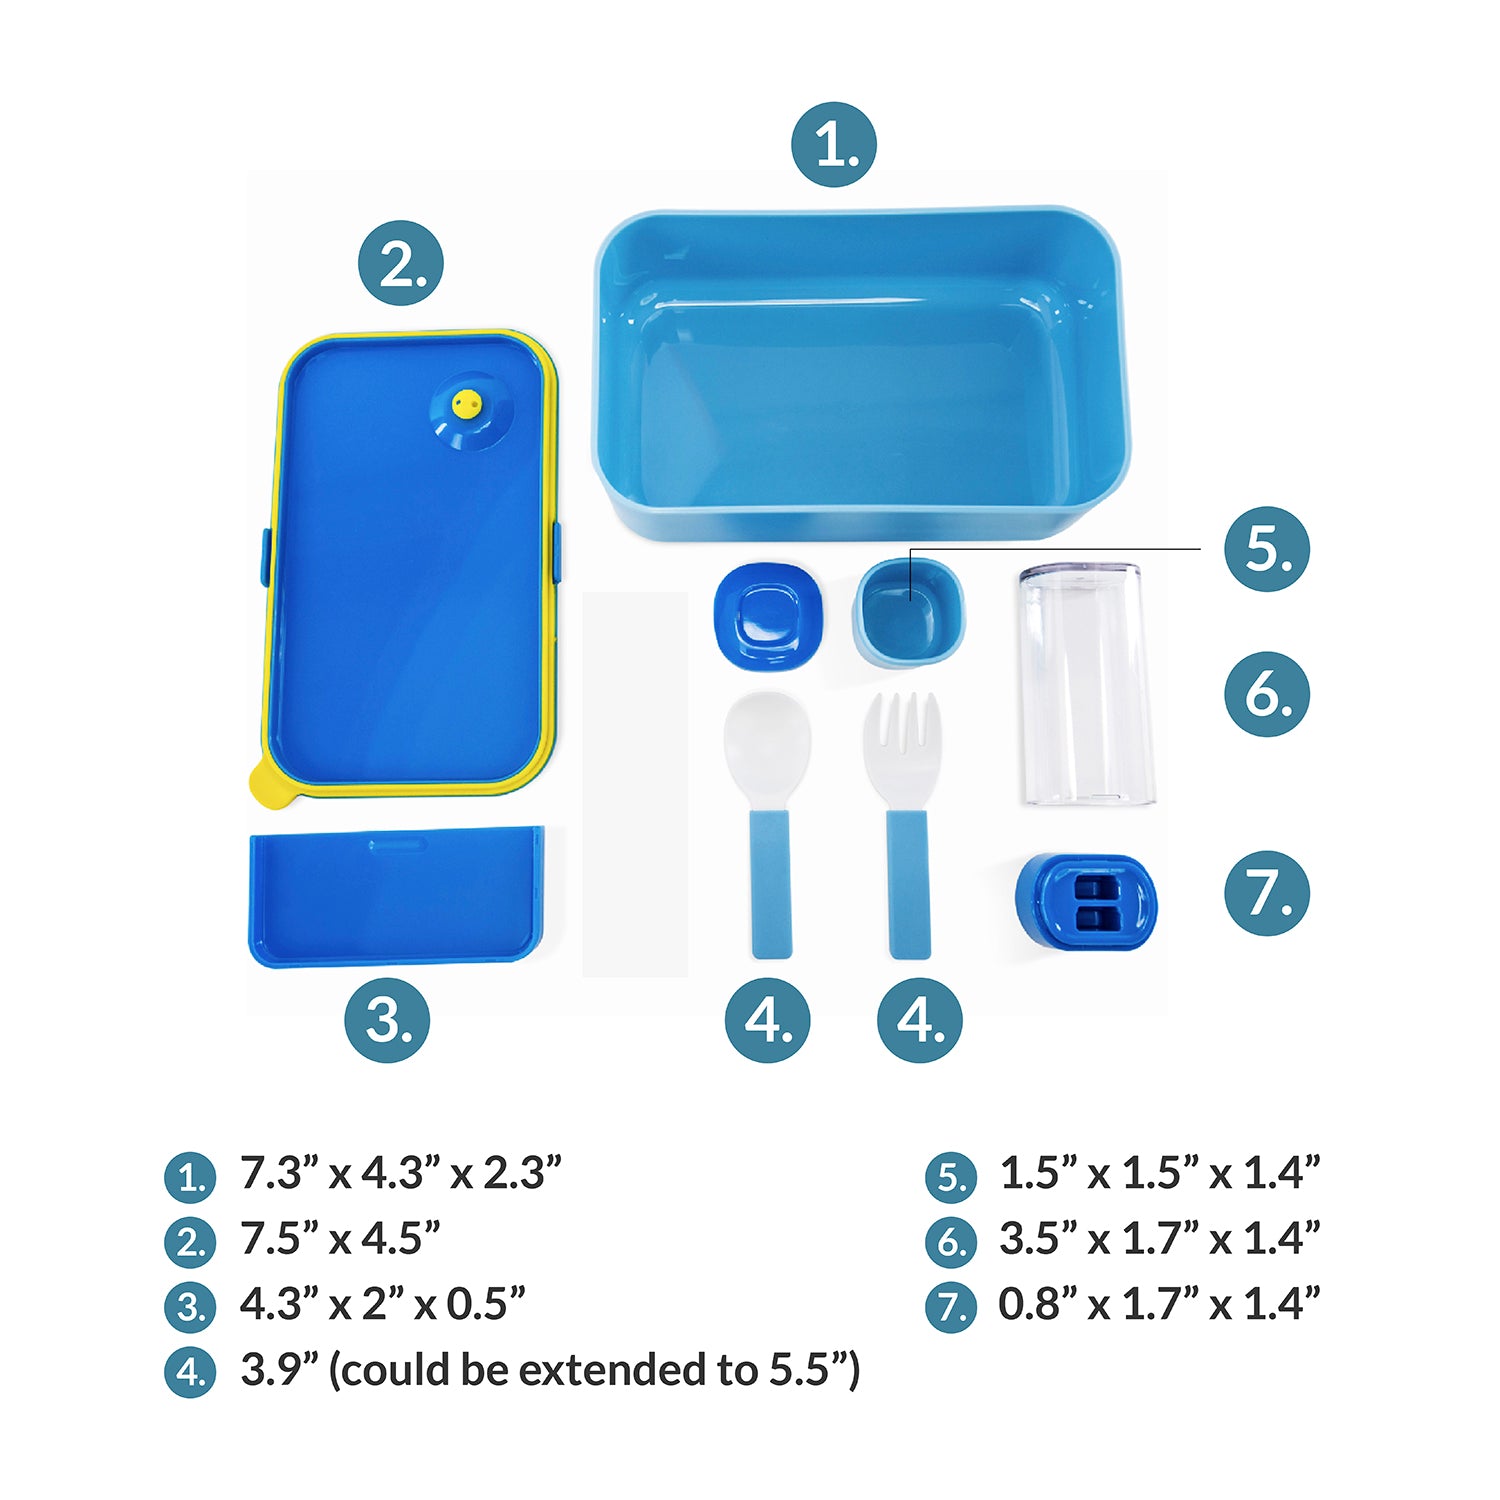 Blue Ele BE03 Lunch Box for Kids Children with Spoon, Fork & Sauce pots